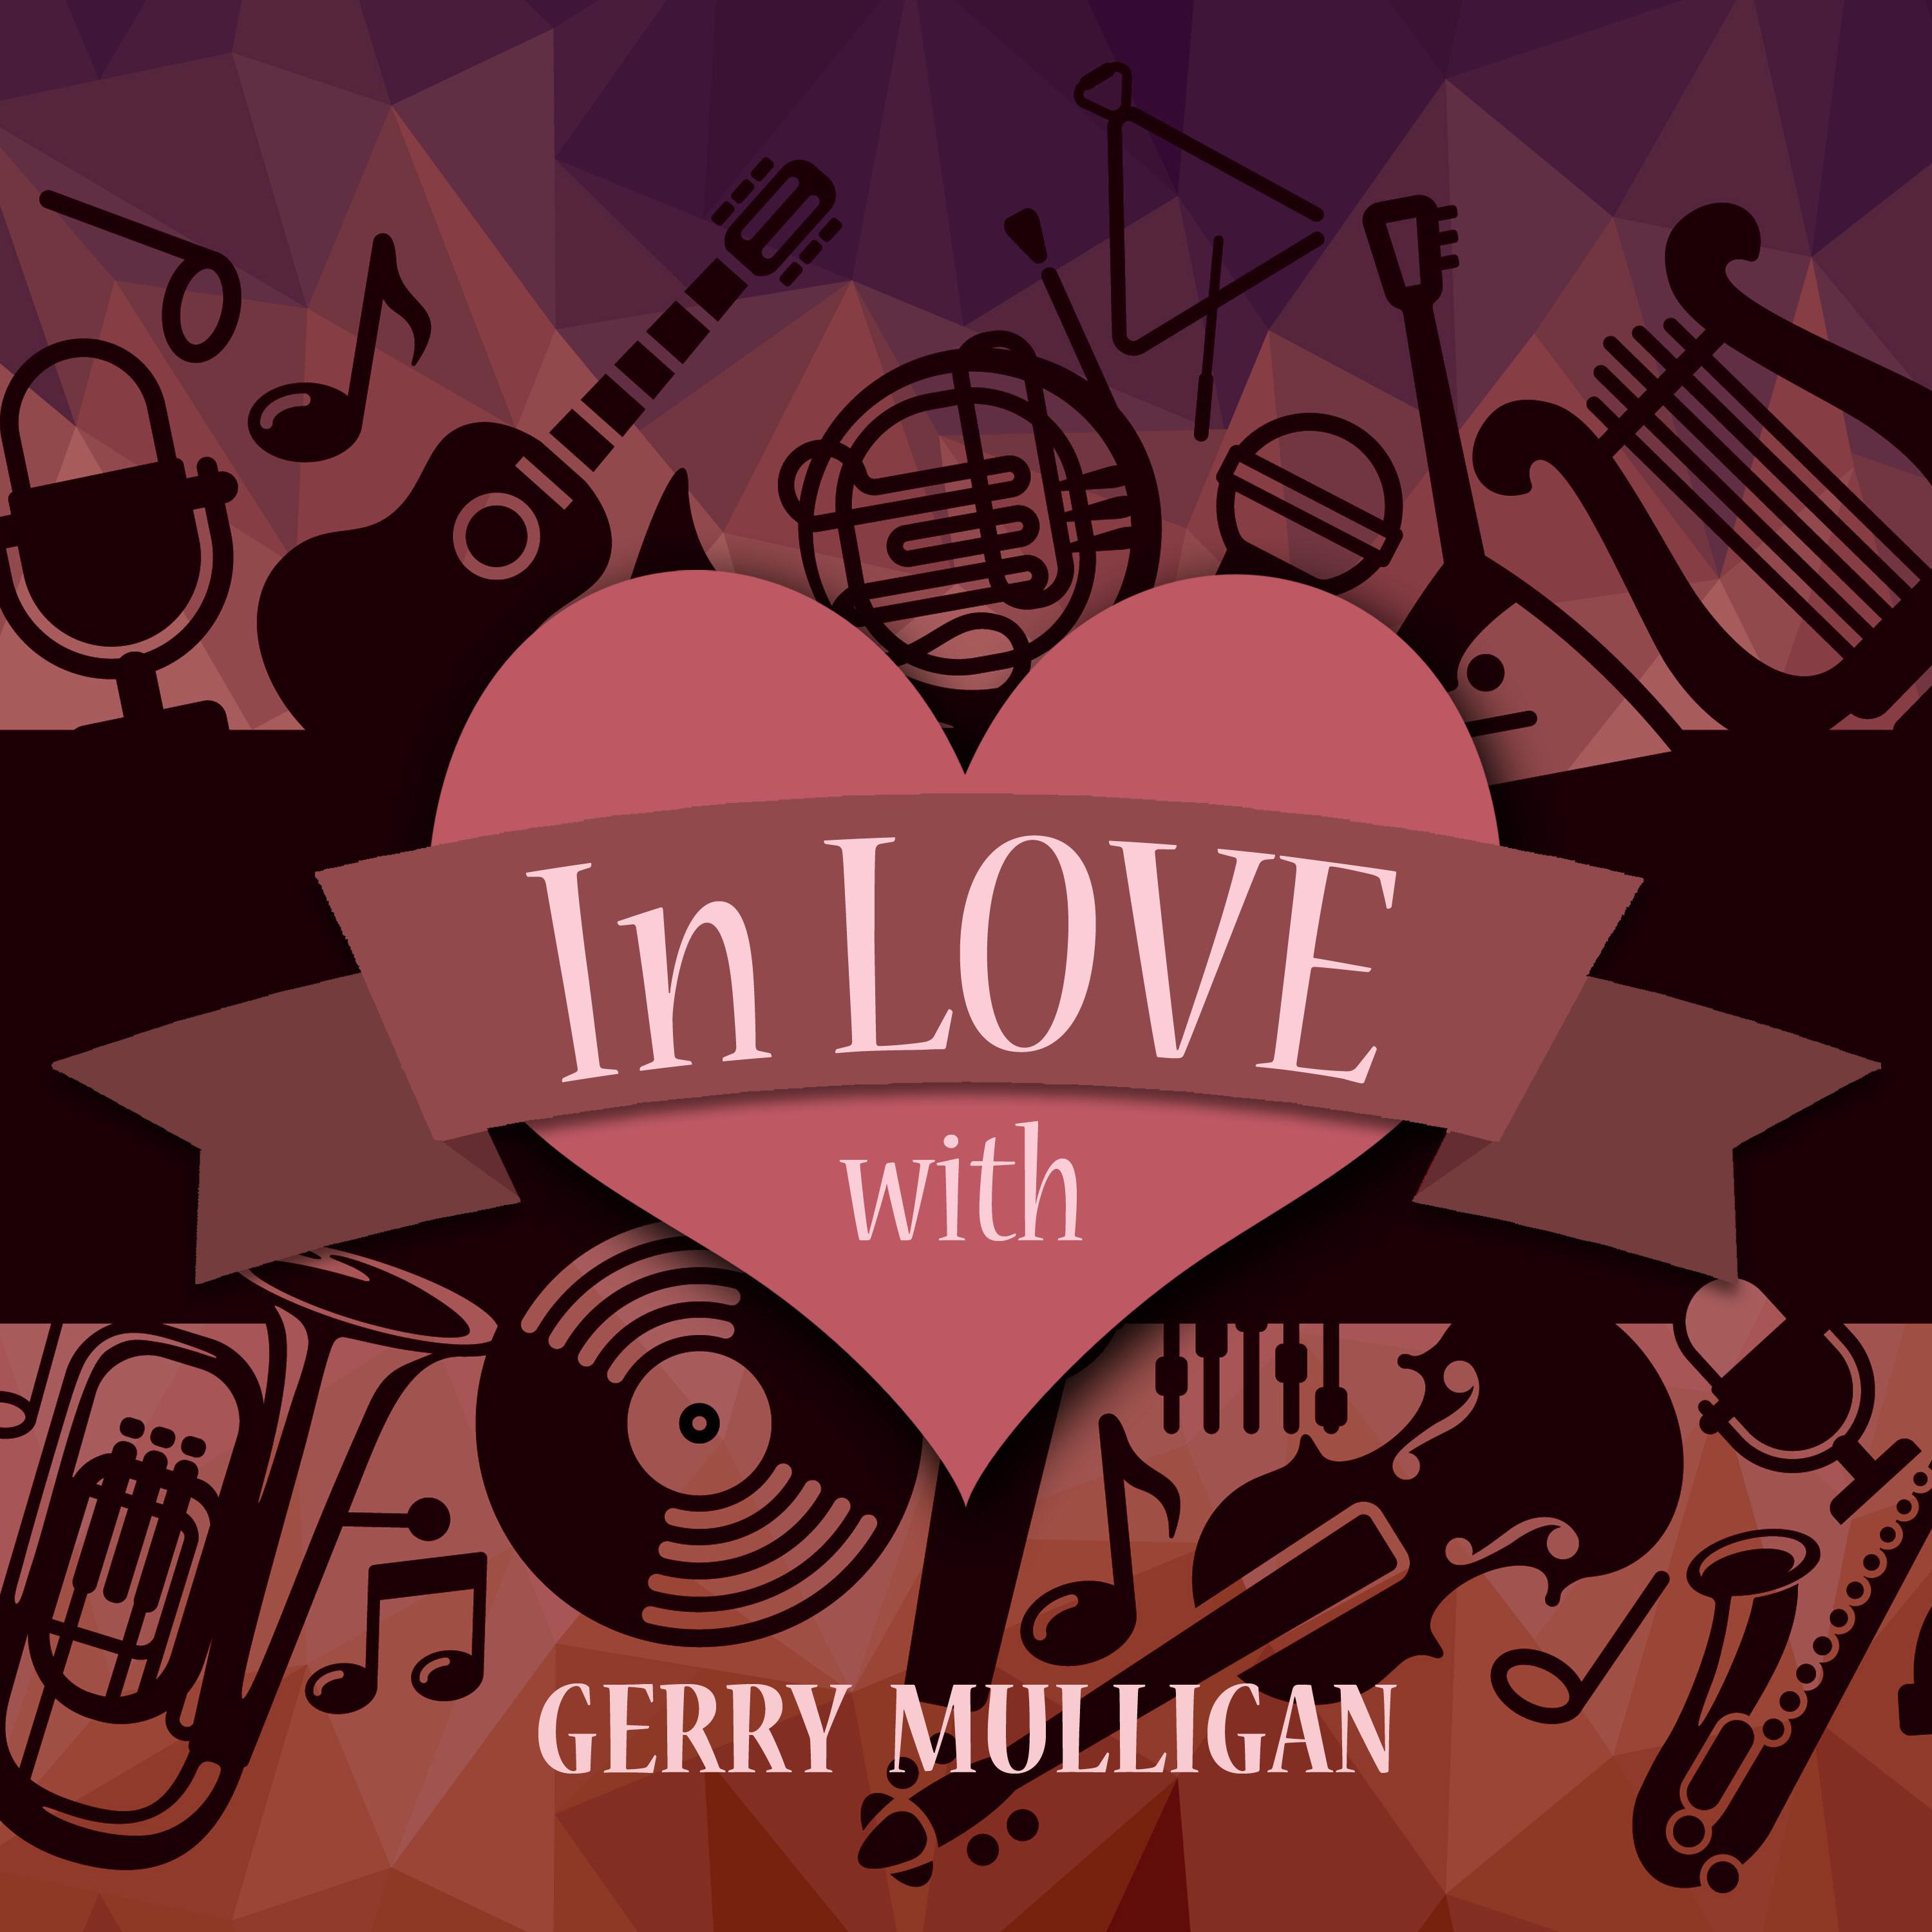 In Love with Gerry Mulligan